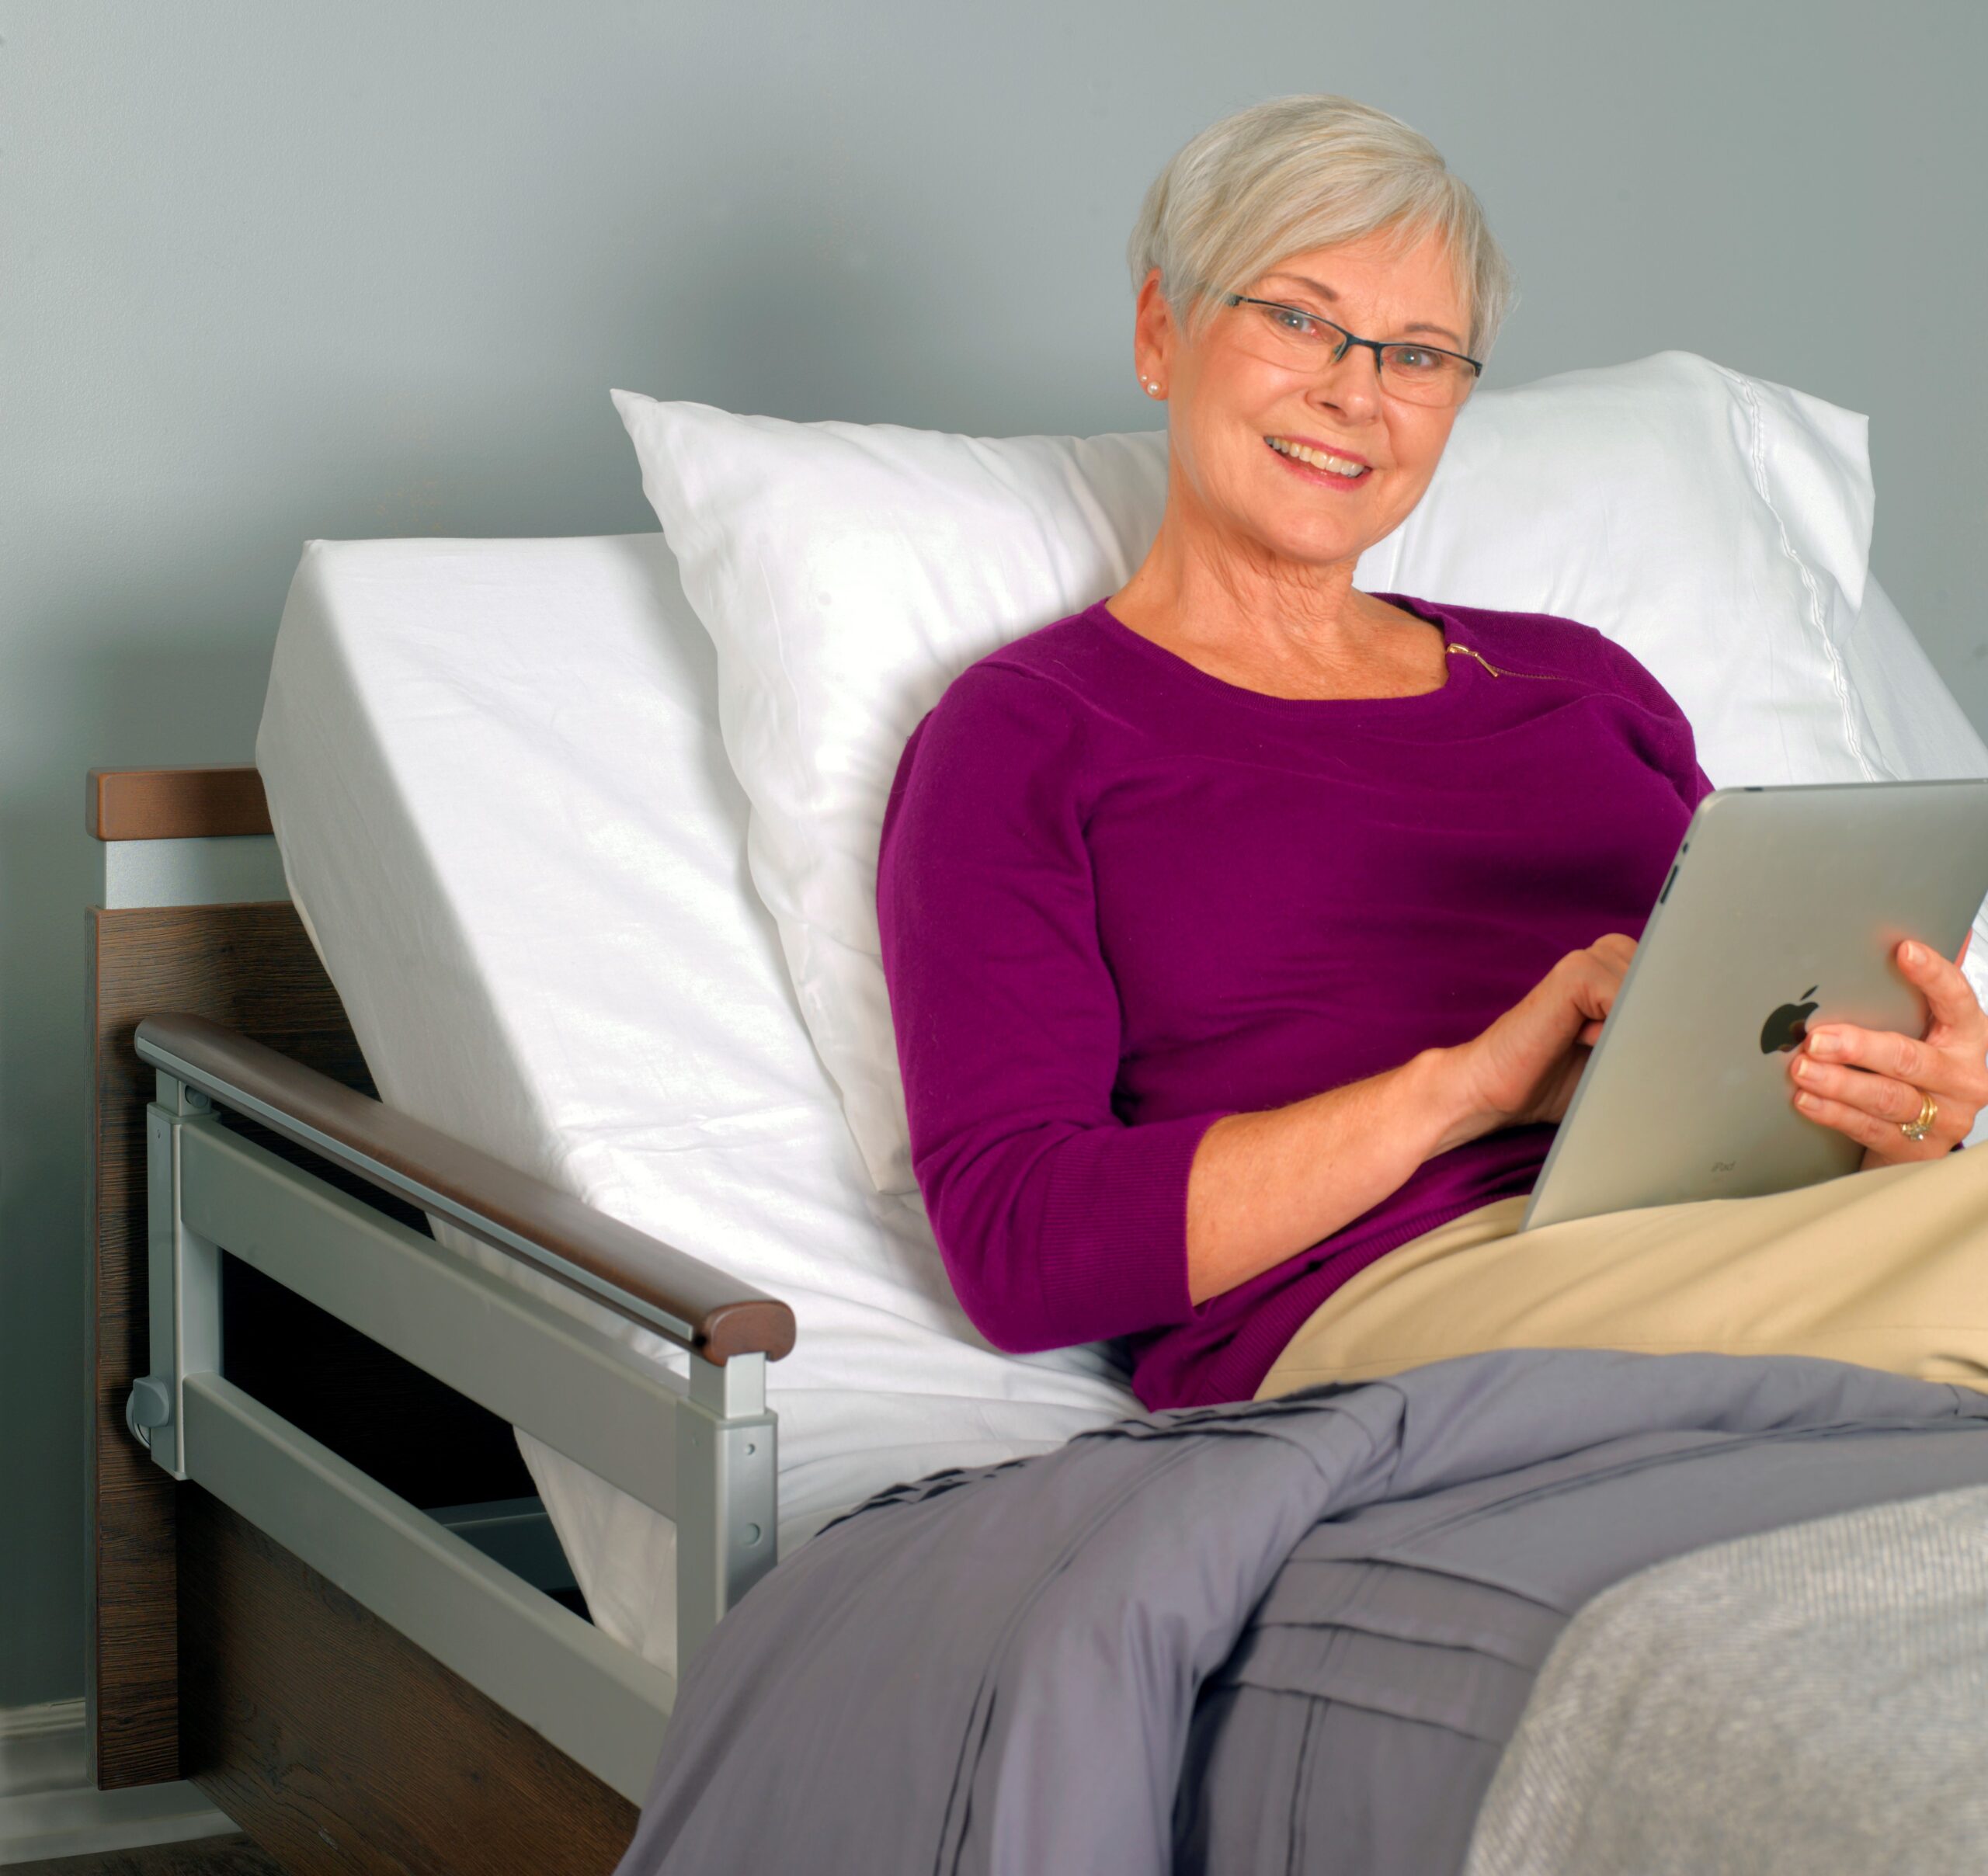 Sondercare hospital bed chair position